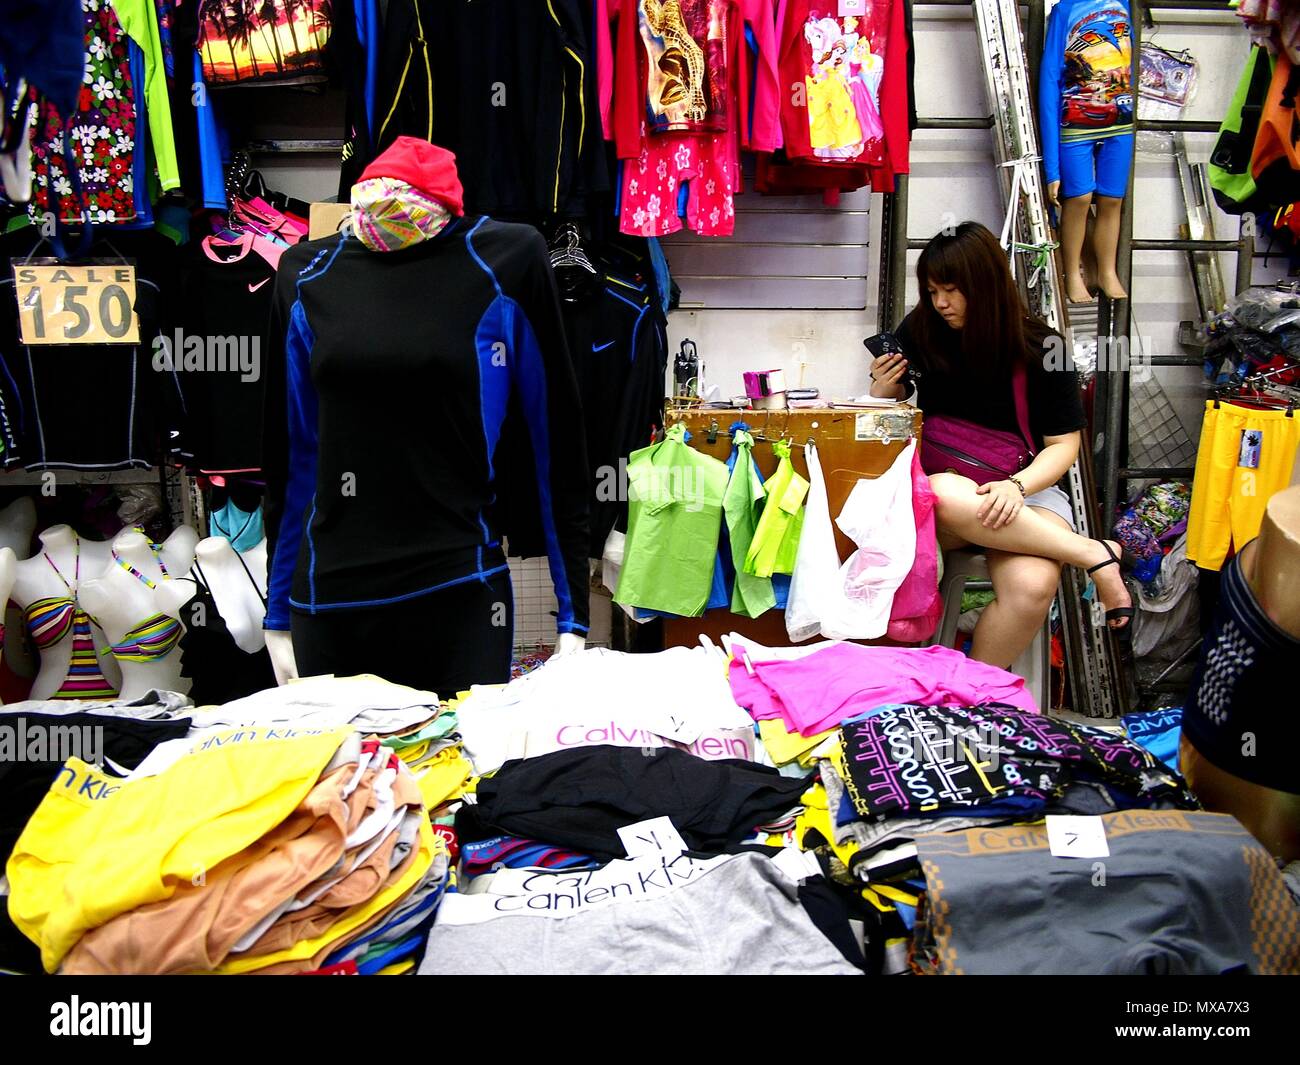 DIVISORIA, MANILA CITY, PHILIPPINES - MAY 14, 2018: Assorted clothes on display at a bazaar stall inside a big shopping mall. Stock Photo